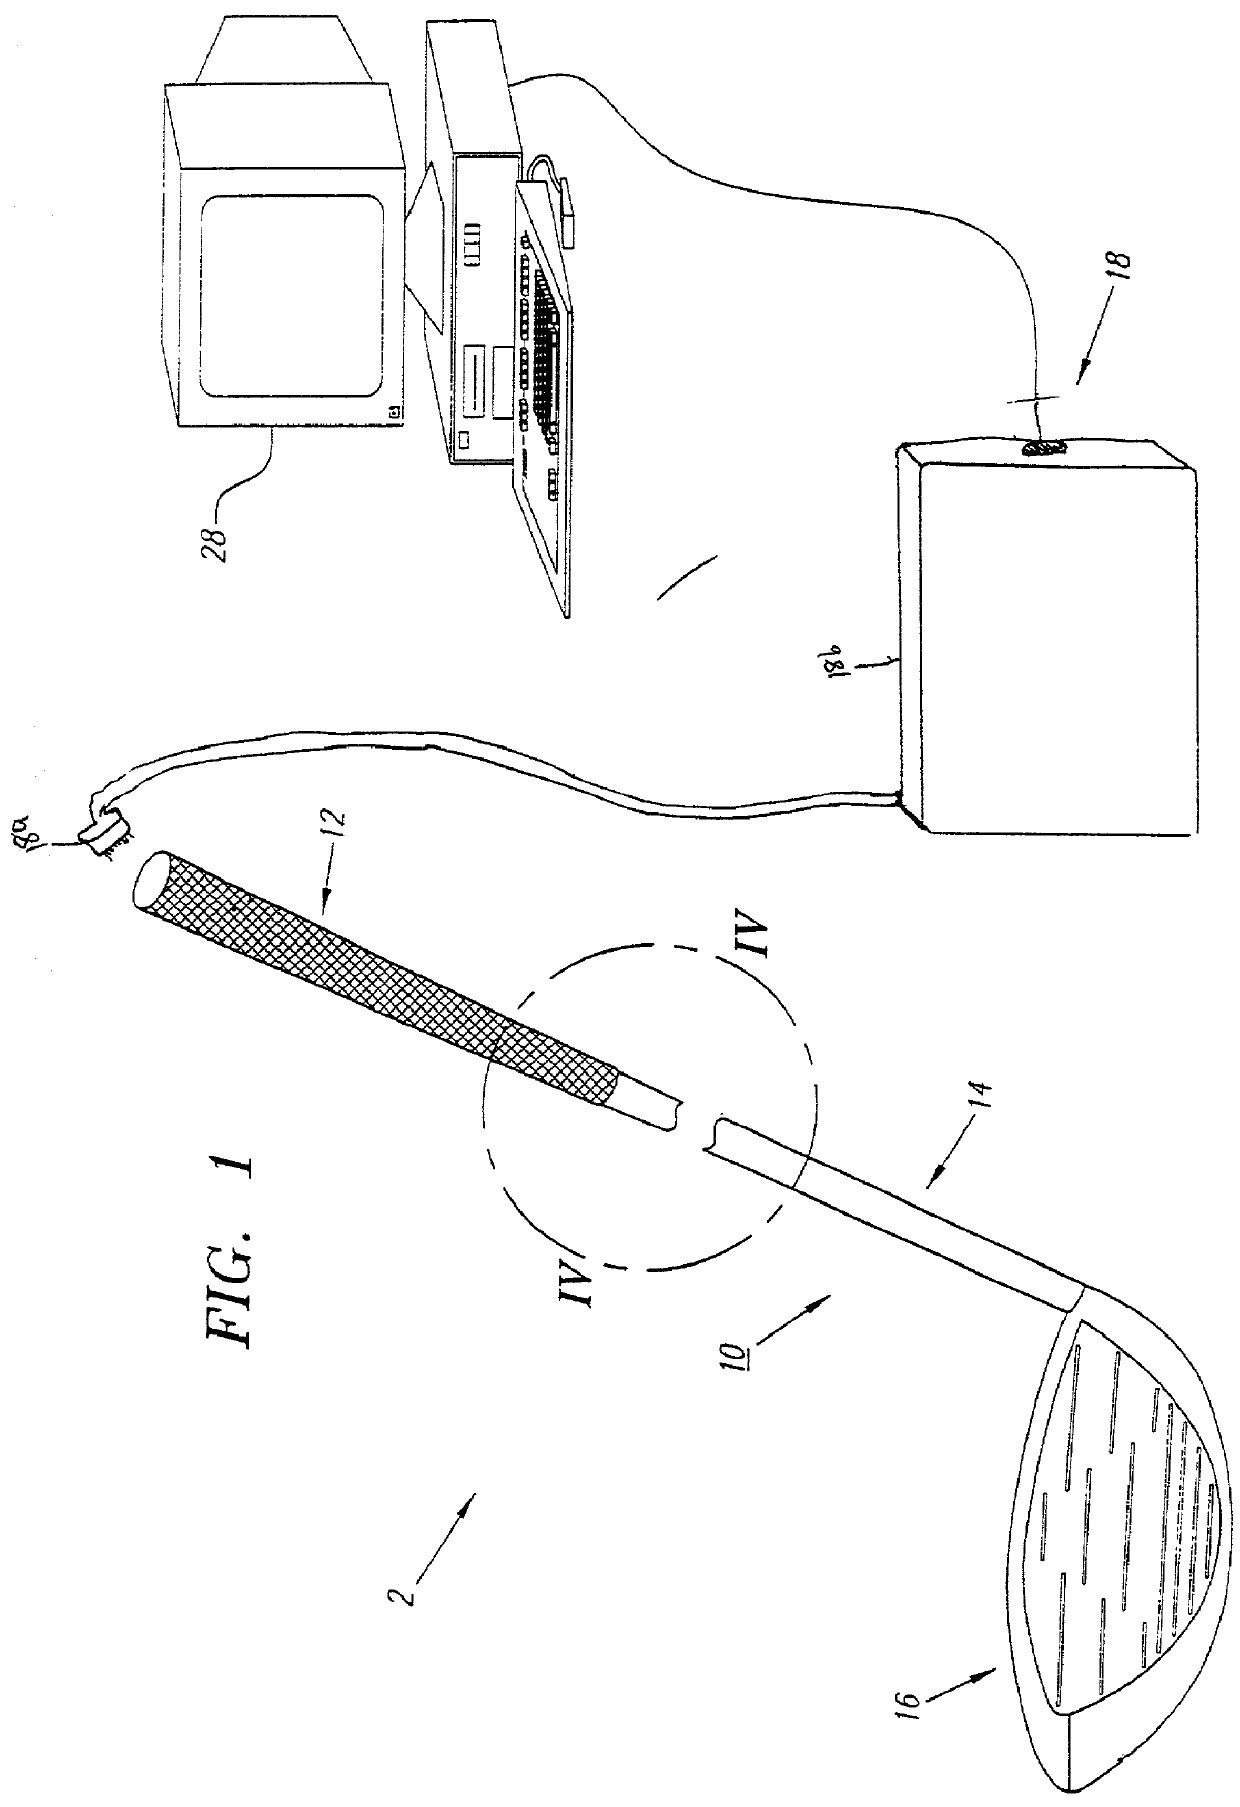 Instrumented golf club system & method of use